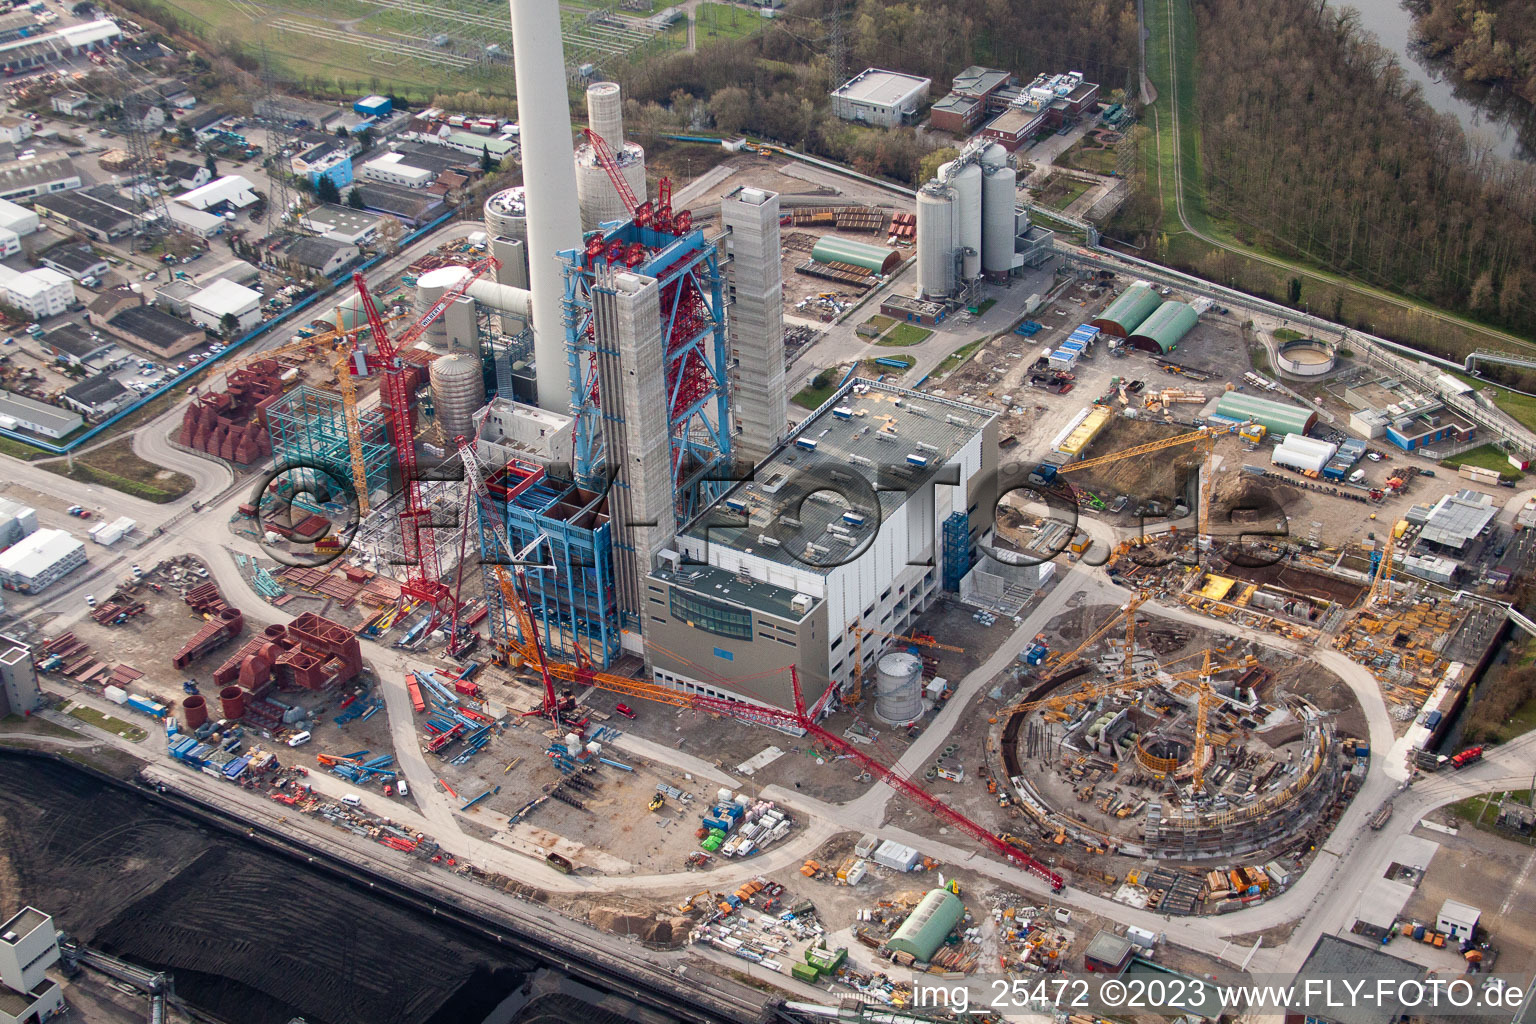 ENBW power plant in the district Rheinhafen in Karlsruhe in the state Baden-Wuerttemberg, Germany from above